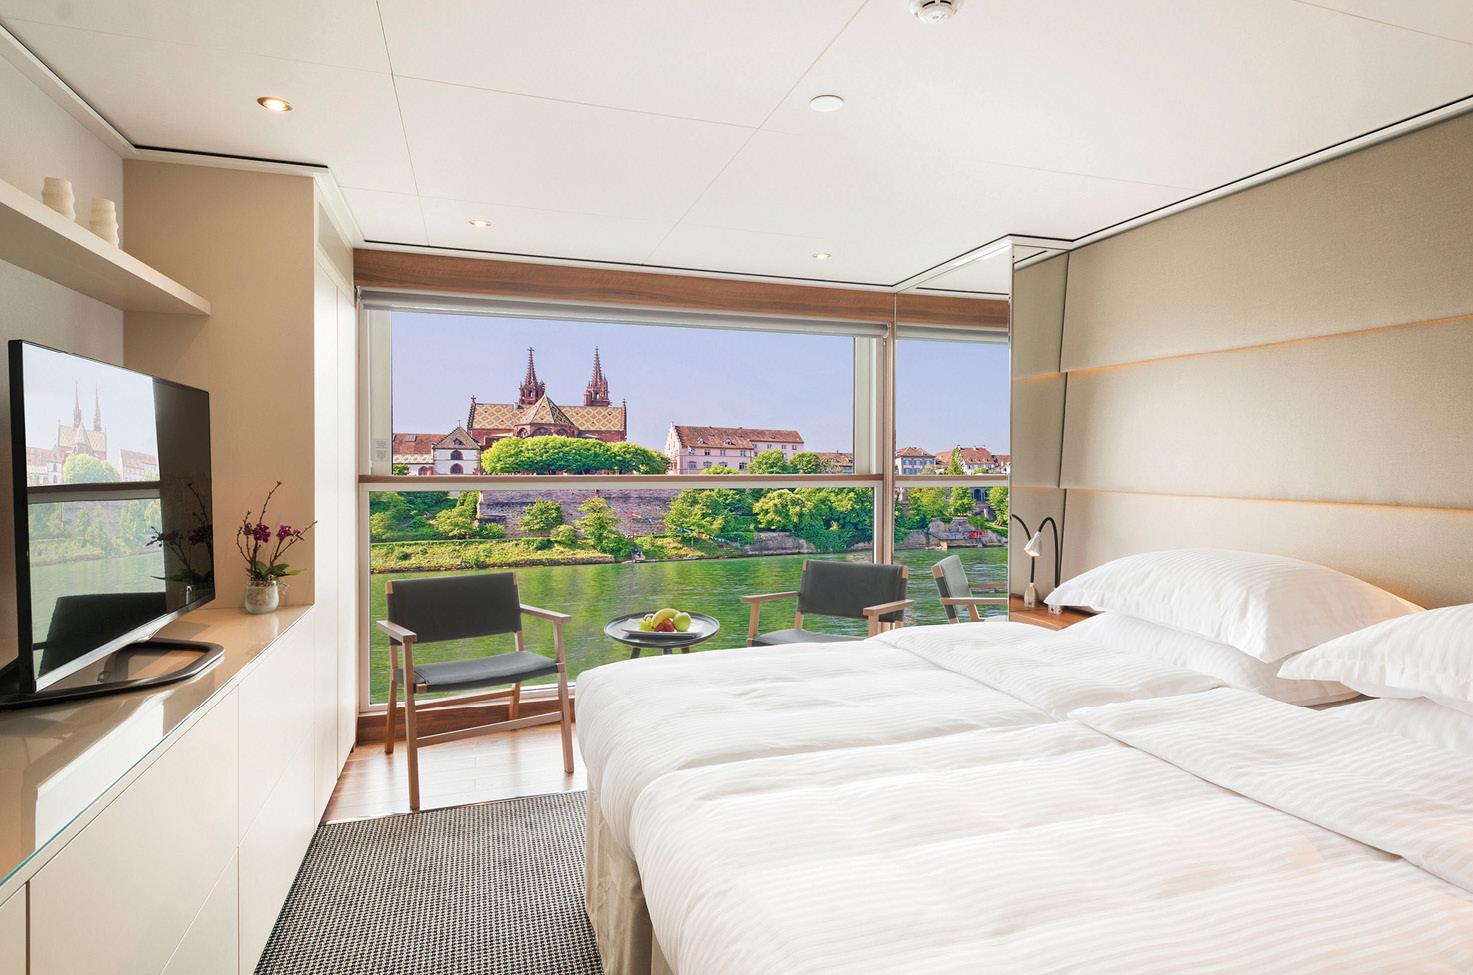 A modern balcony suite with a crispy white queen size bed, tv, and comfortable seating on board an Emerald Cruises river ship sailing through the heart of Europe. 